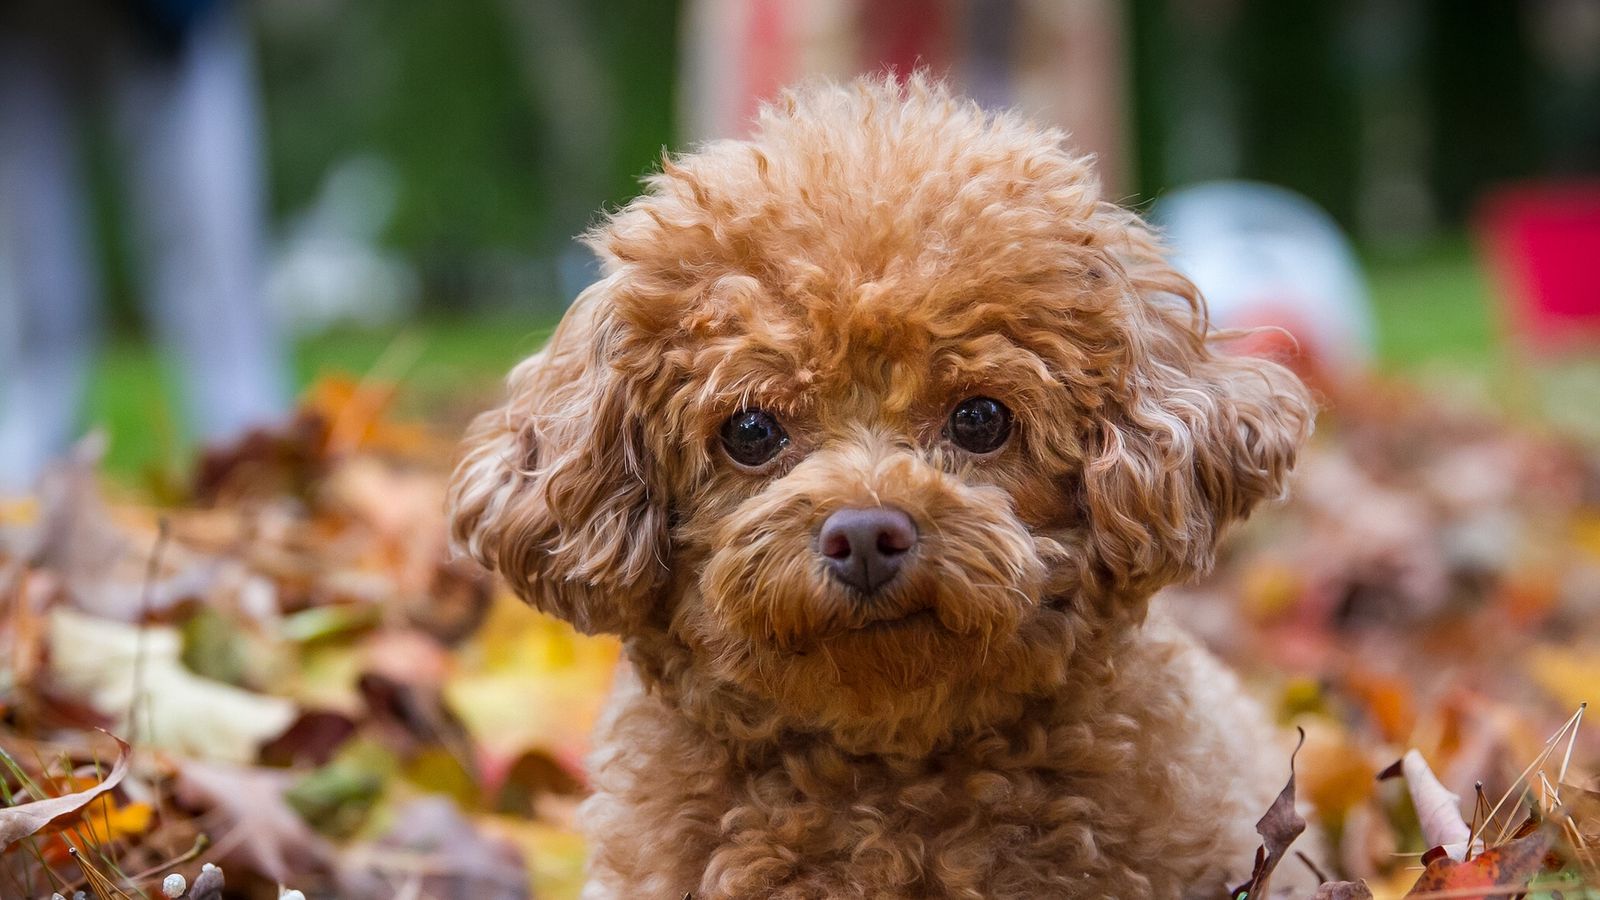 Download wallpaper 1600x900 poodle, dog, puppy, leaves widescreen 16:9 HD background